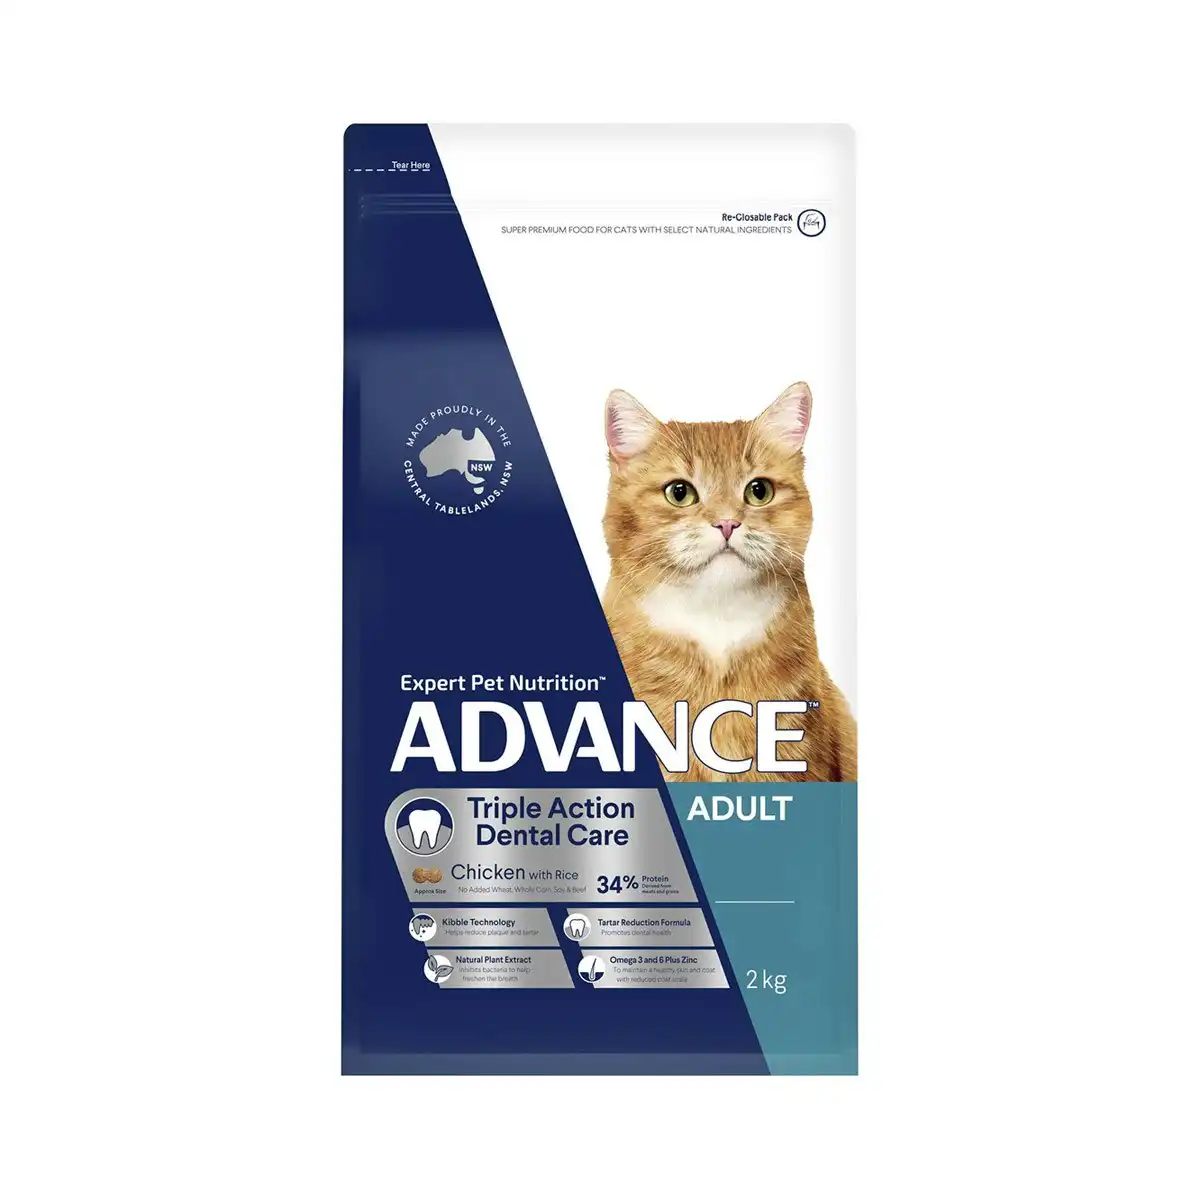 ADVANCE Dental Care Triple Action Adult Chicken with Rice Dry Cat Food 2 Kg